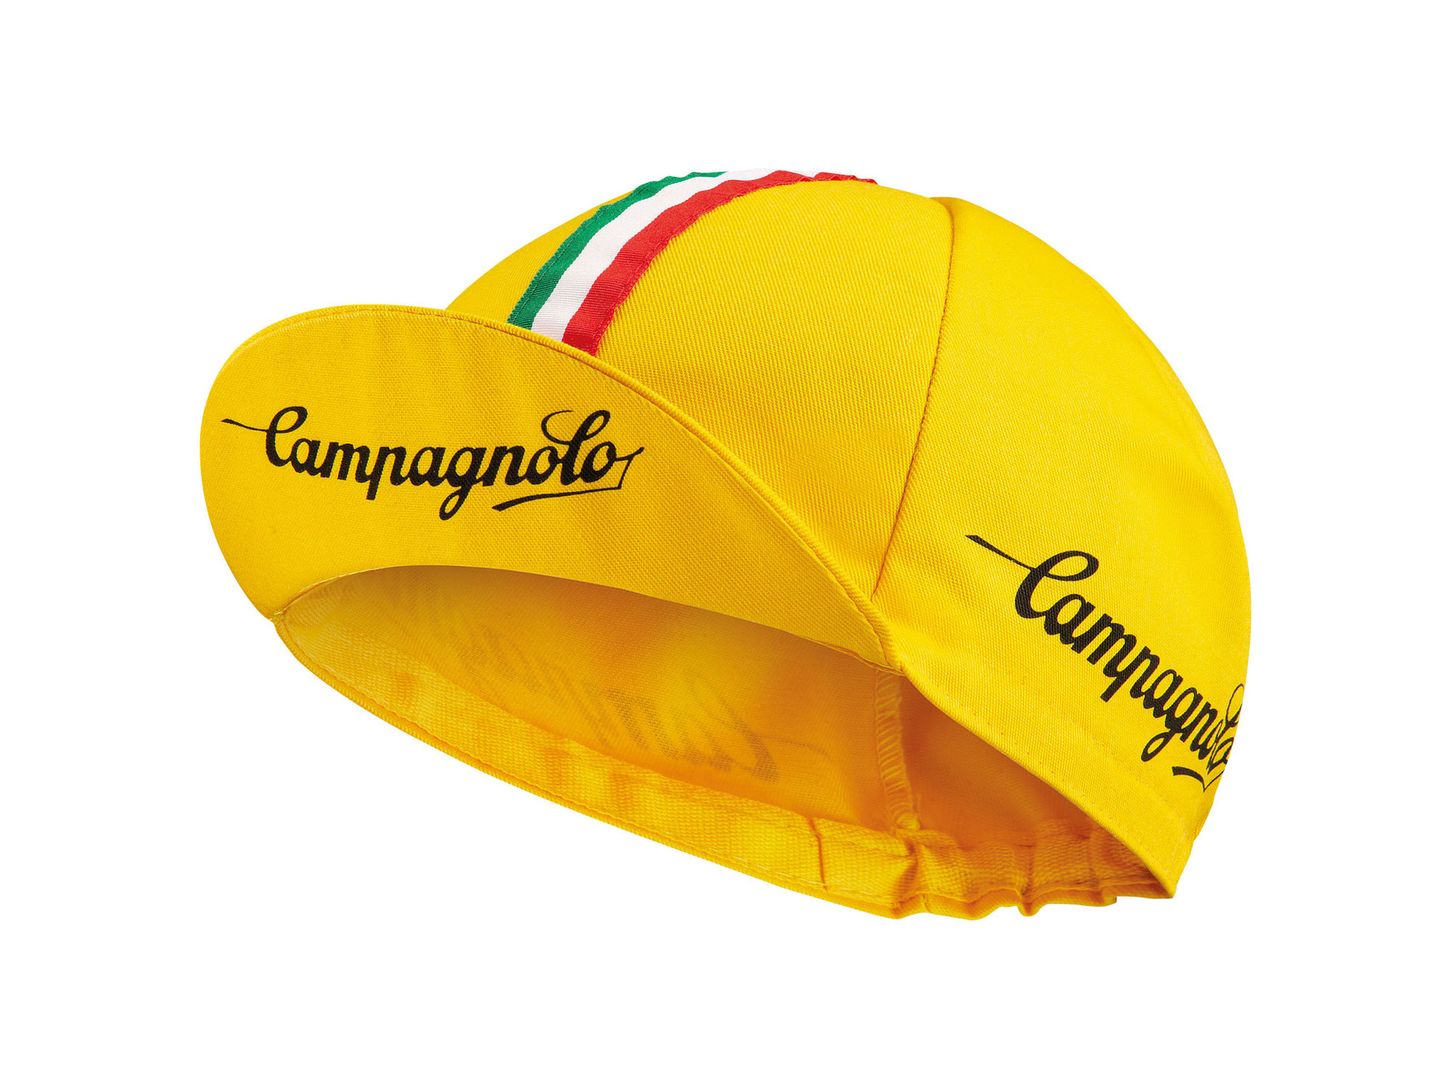 Bontrager Classic Cycling Cap - Radioactive Yellow - One Size